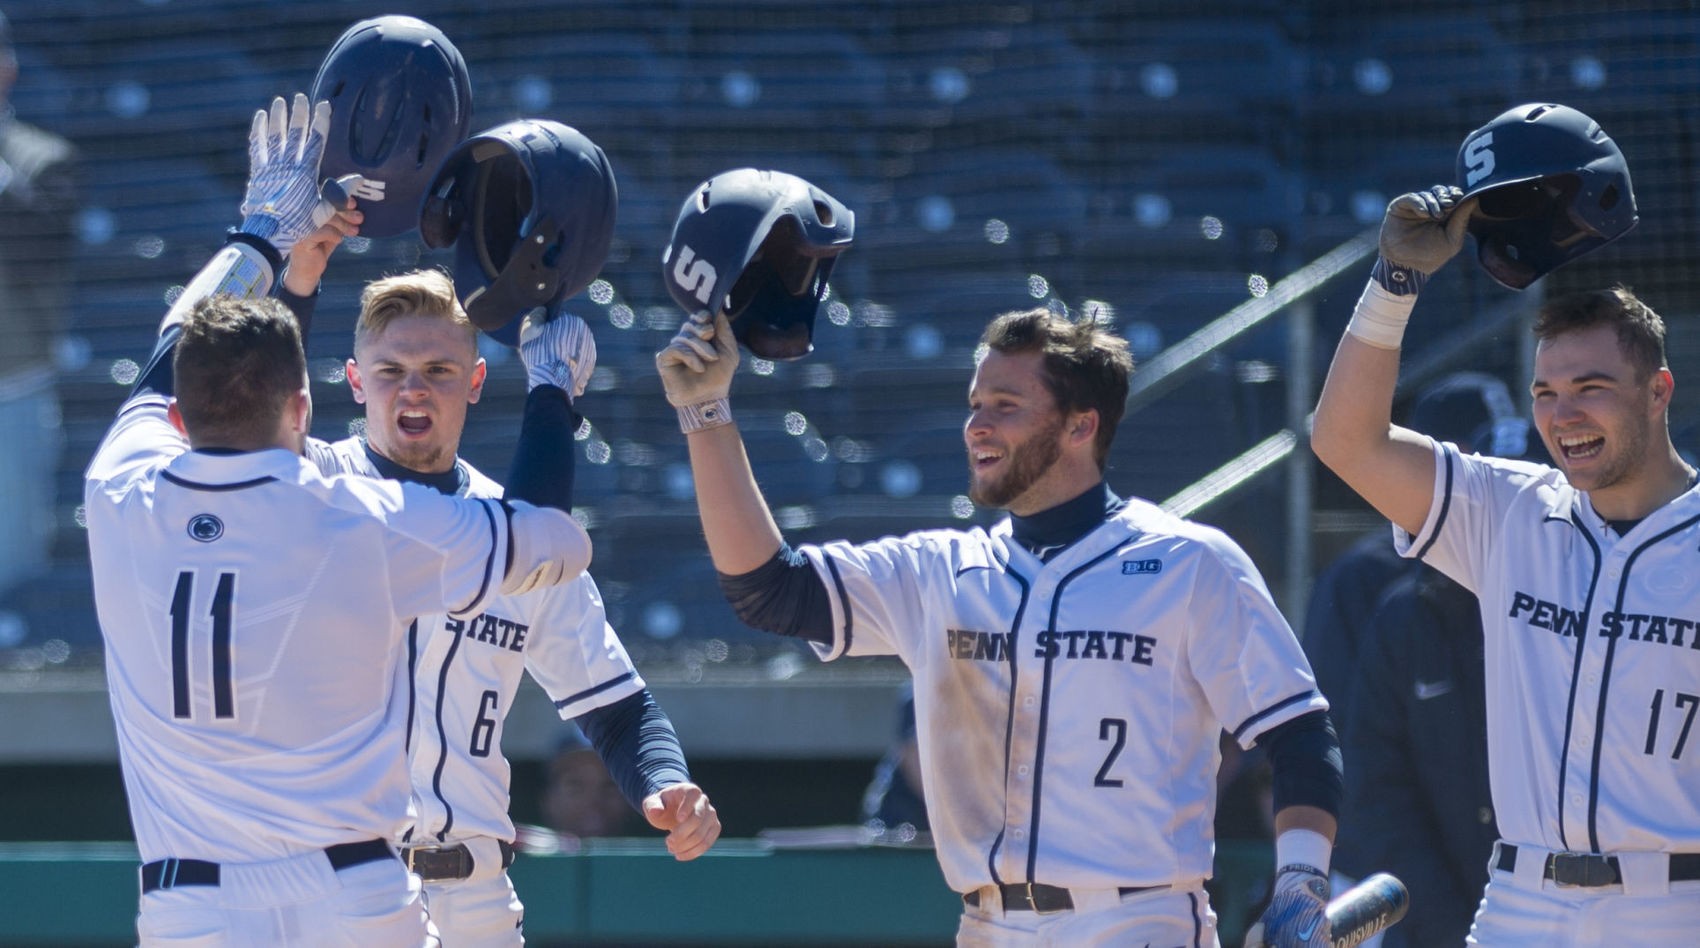 Penn State baseball uses breakout at the plate to rout Rutgers